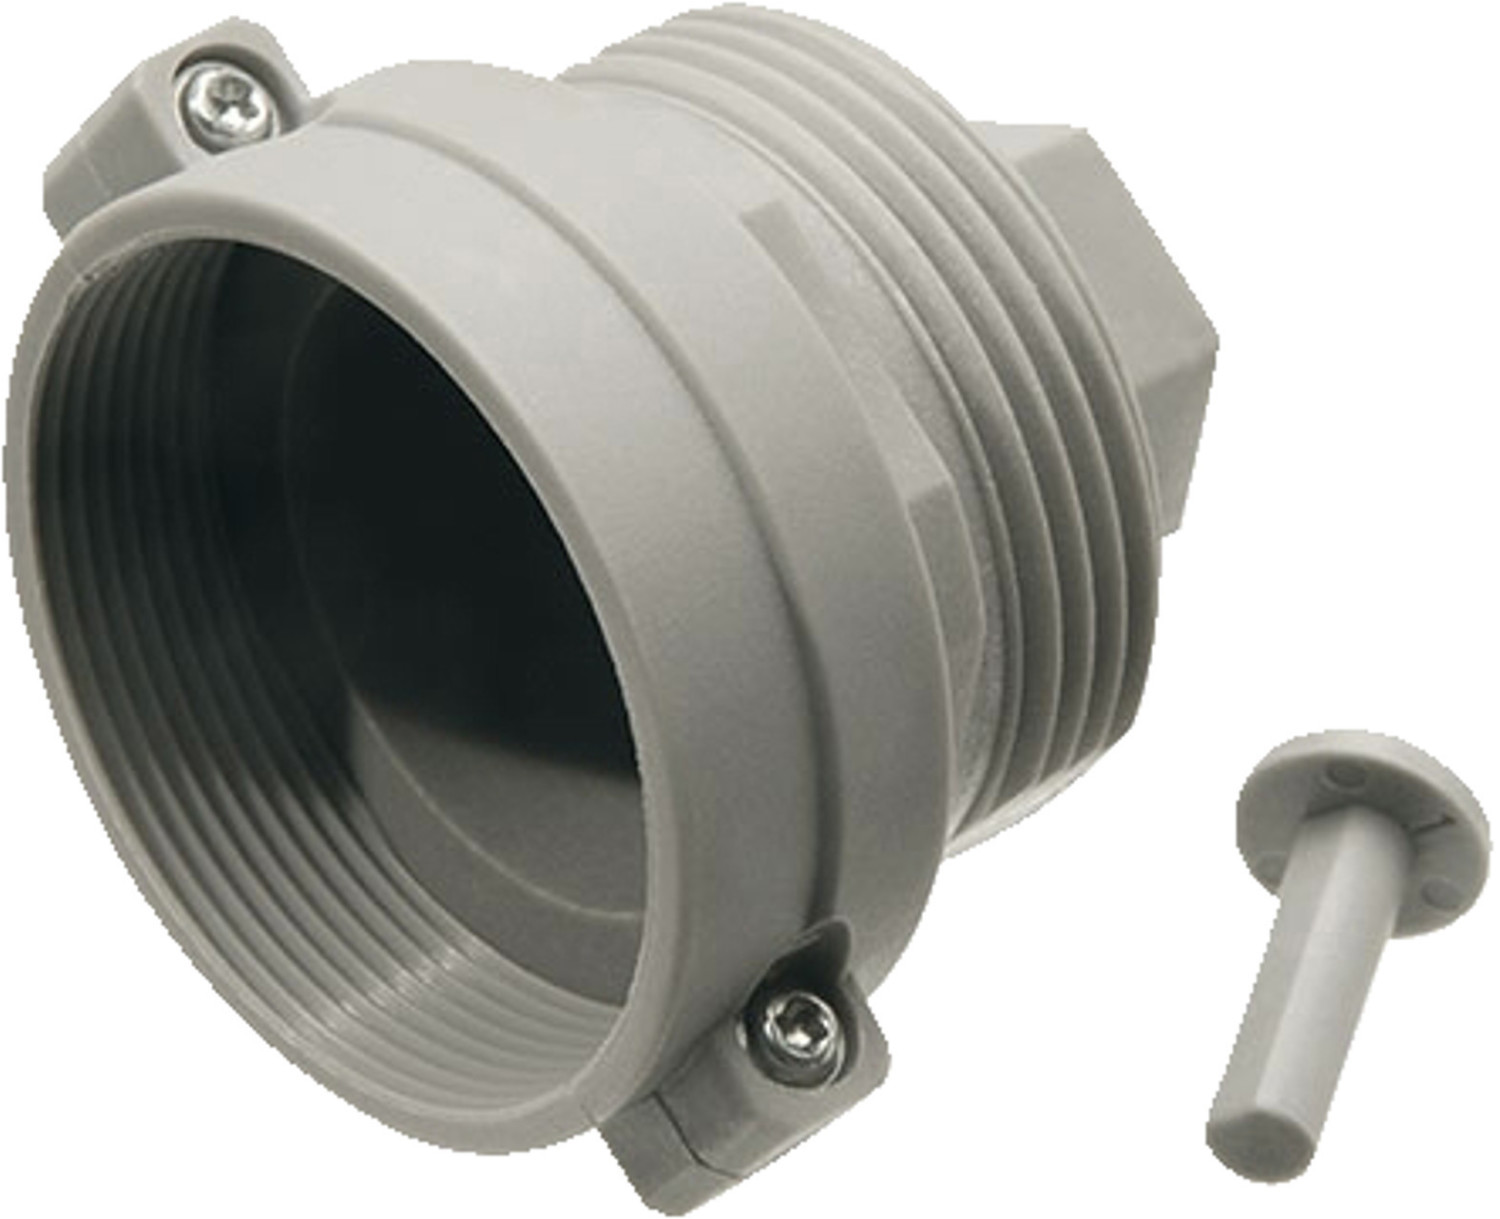 Adapter nickel plated, for the conversion of connection thread M 30 x 1.0  to M 30 x 1.5 - Oventrop GmbH & Co. KG